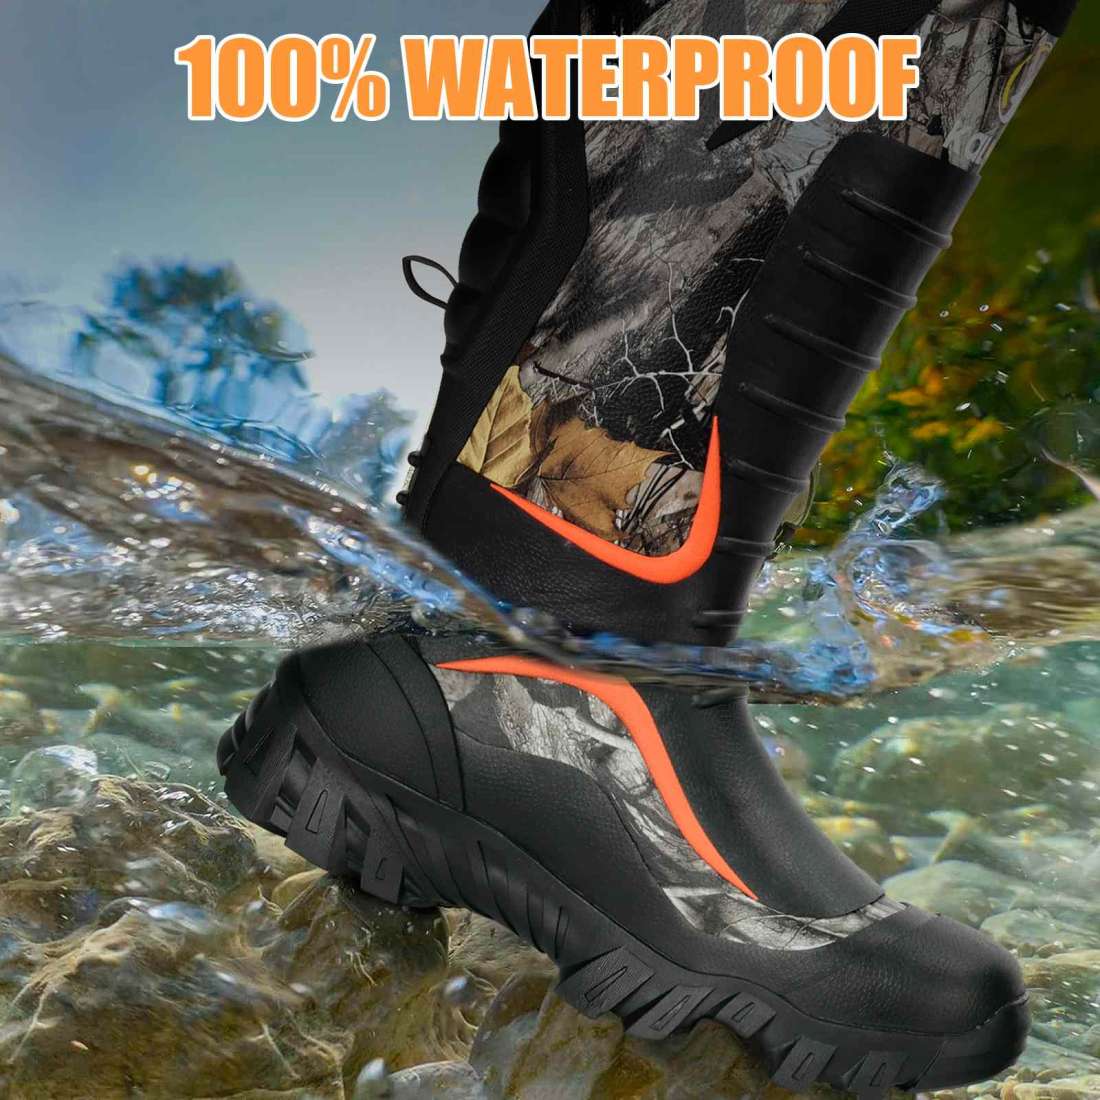 Kalkal Insulated Warmest Rubber Hunting Boots, Camouflage Boots For Men ...